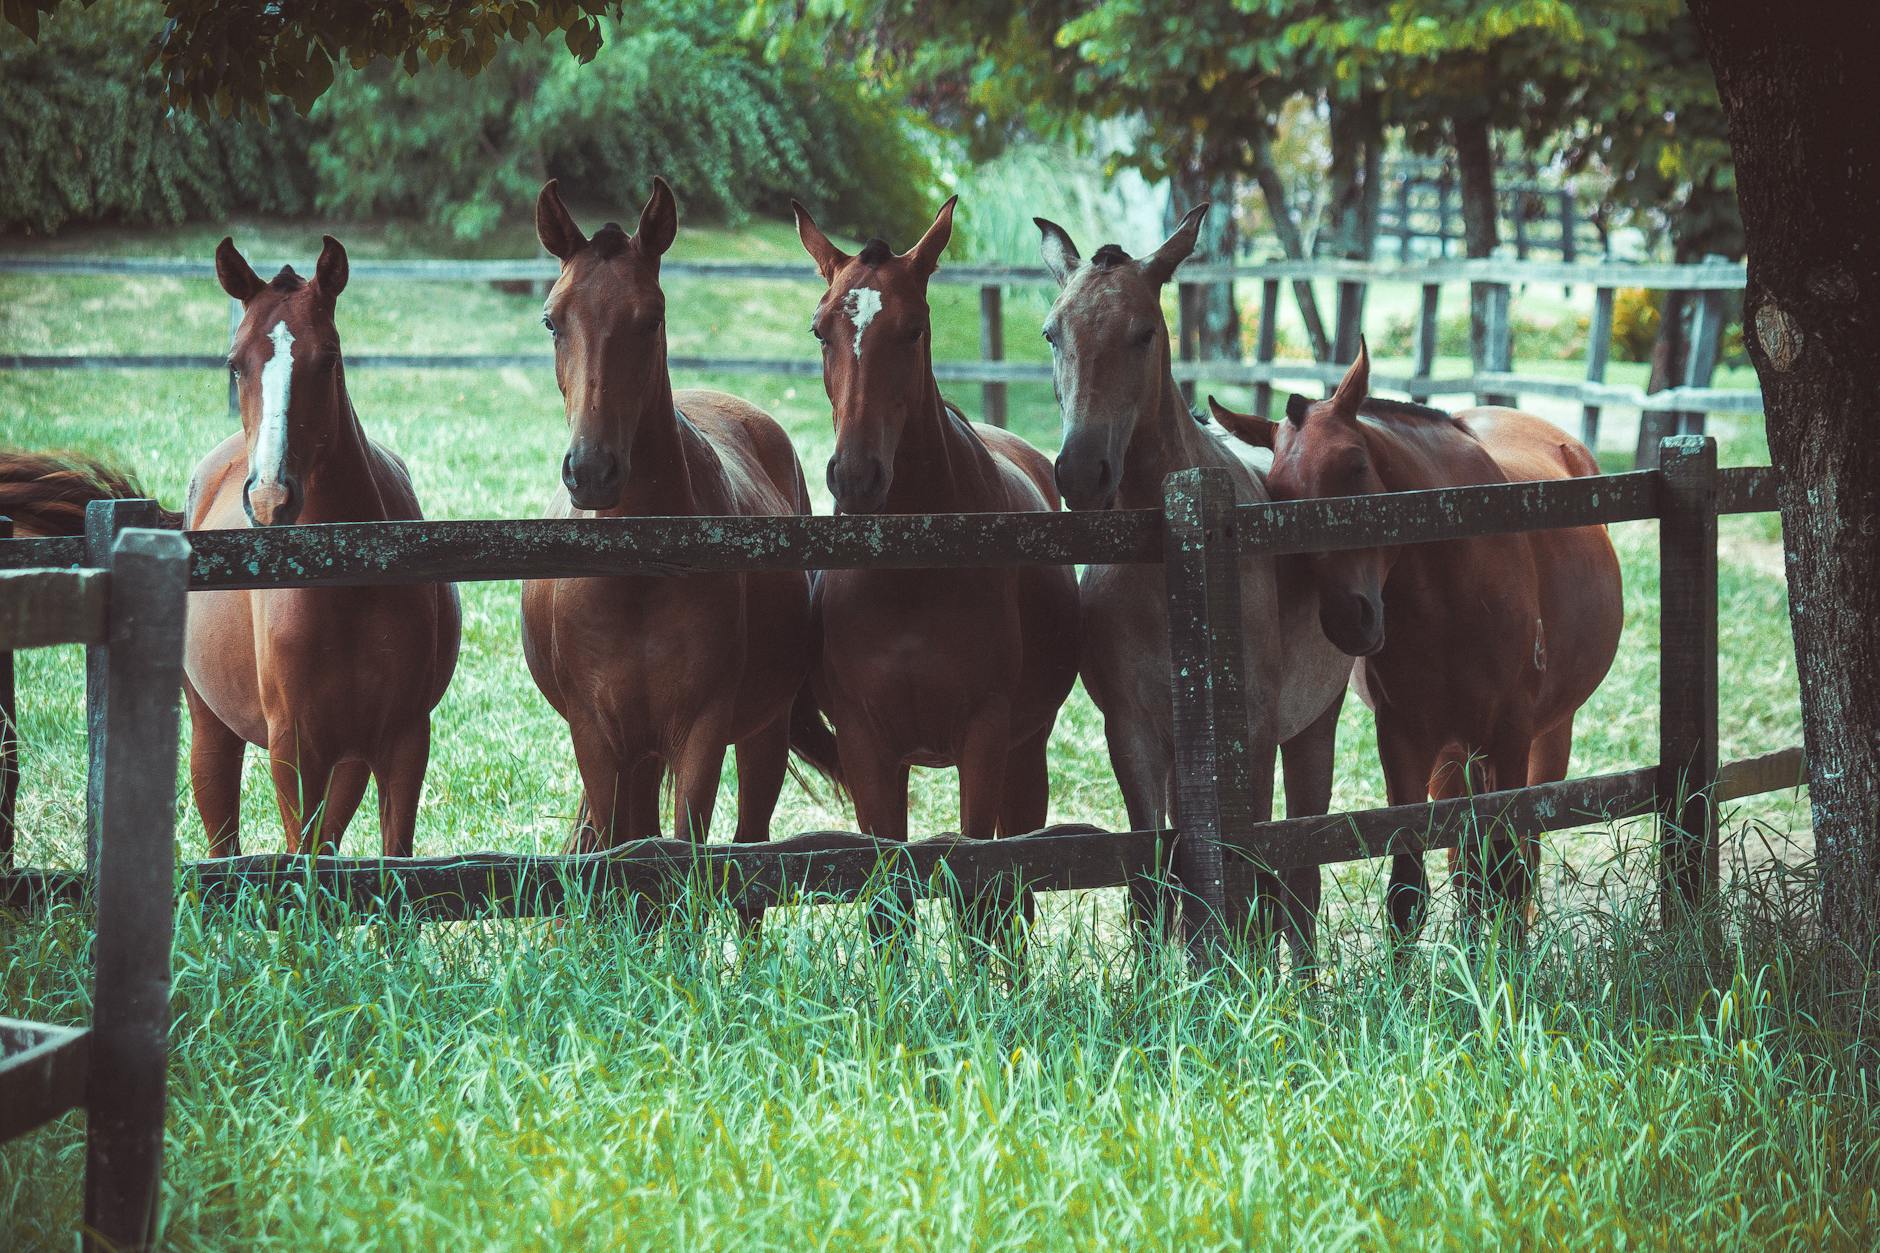 photo of a group of horses
pet plan